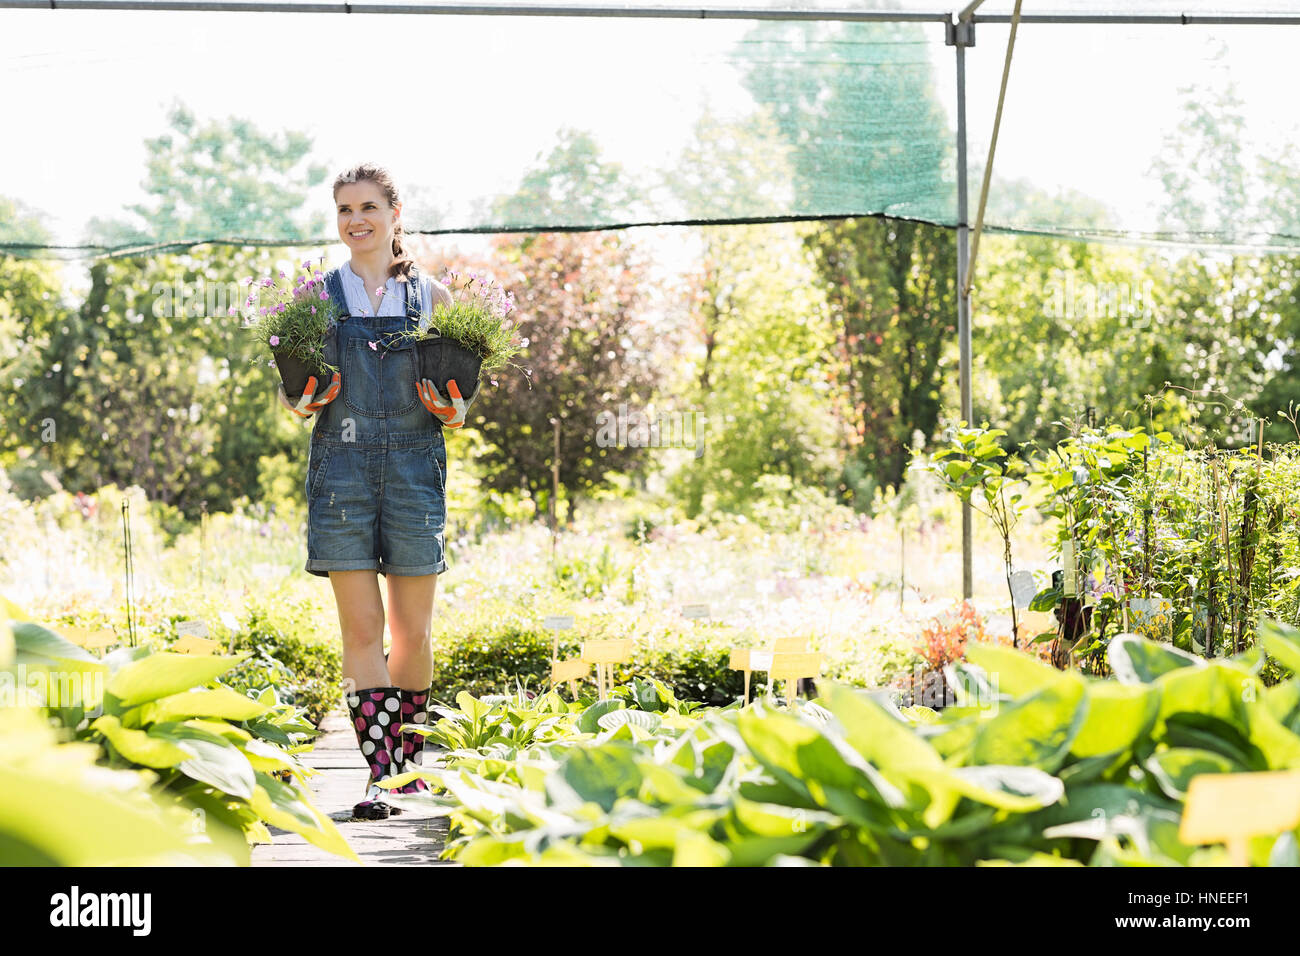 Full-length of gardener looking away while holding potted plants at greenhouse Stock Photo